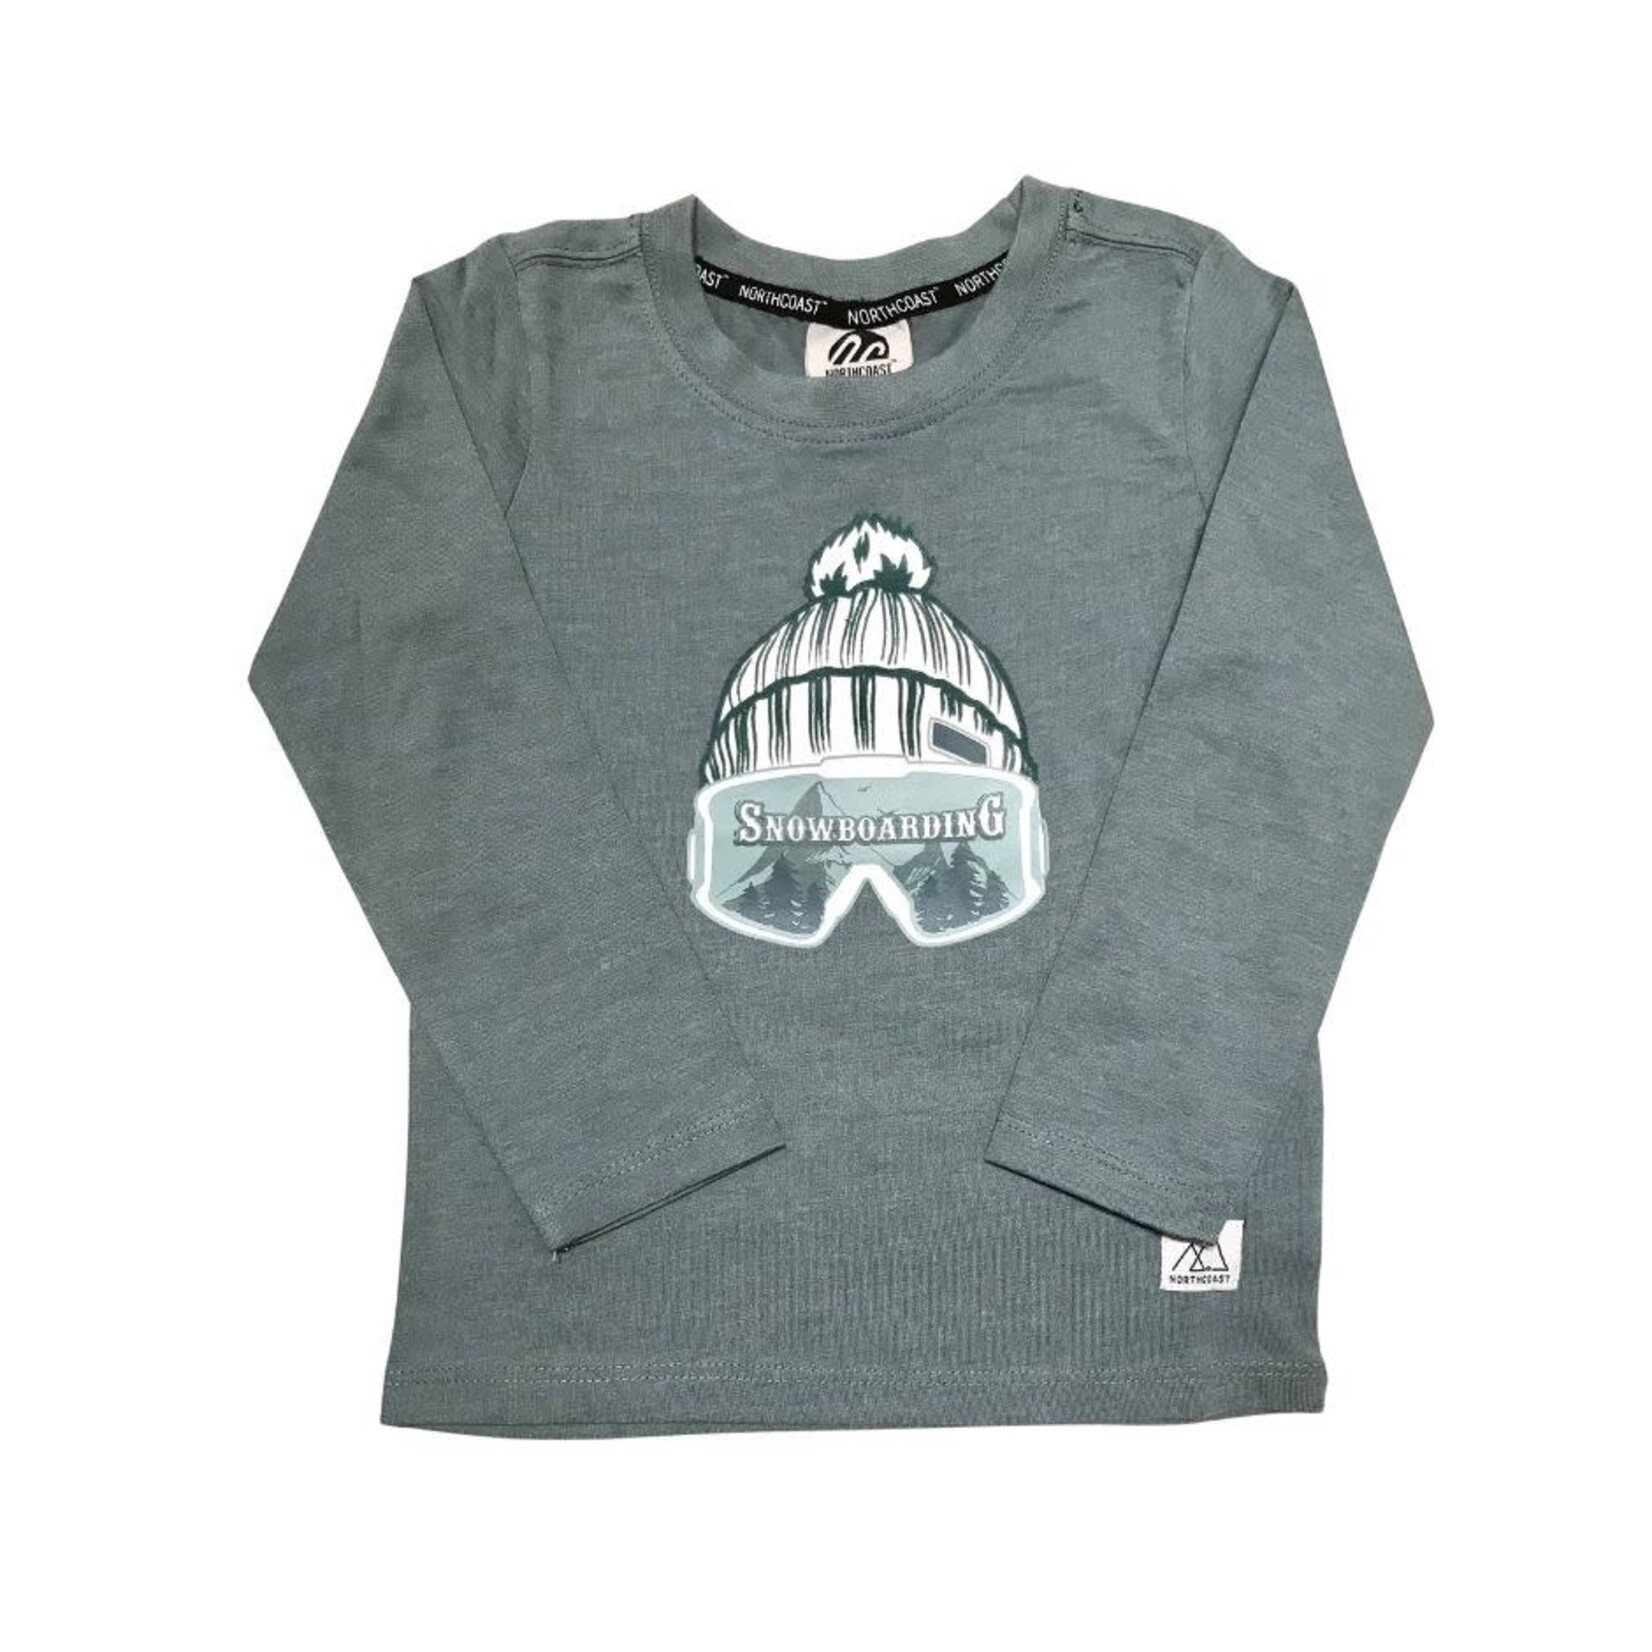 Northcoast NORTHCOAST - Longsleeve grey-green t-shirt with white hat and snow goggles print 'Snowboarding'